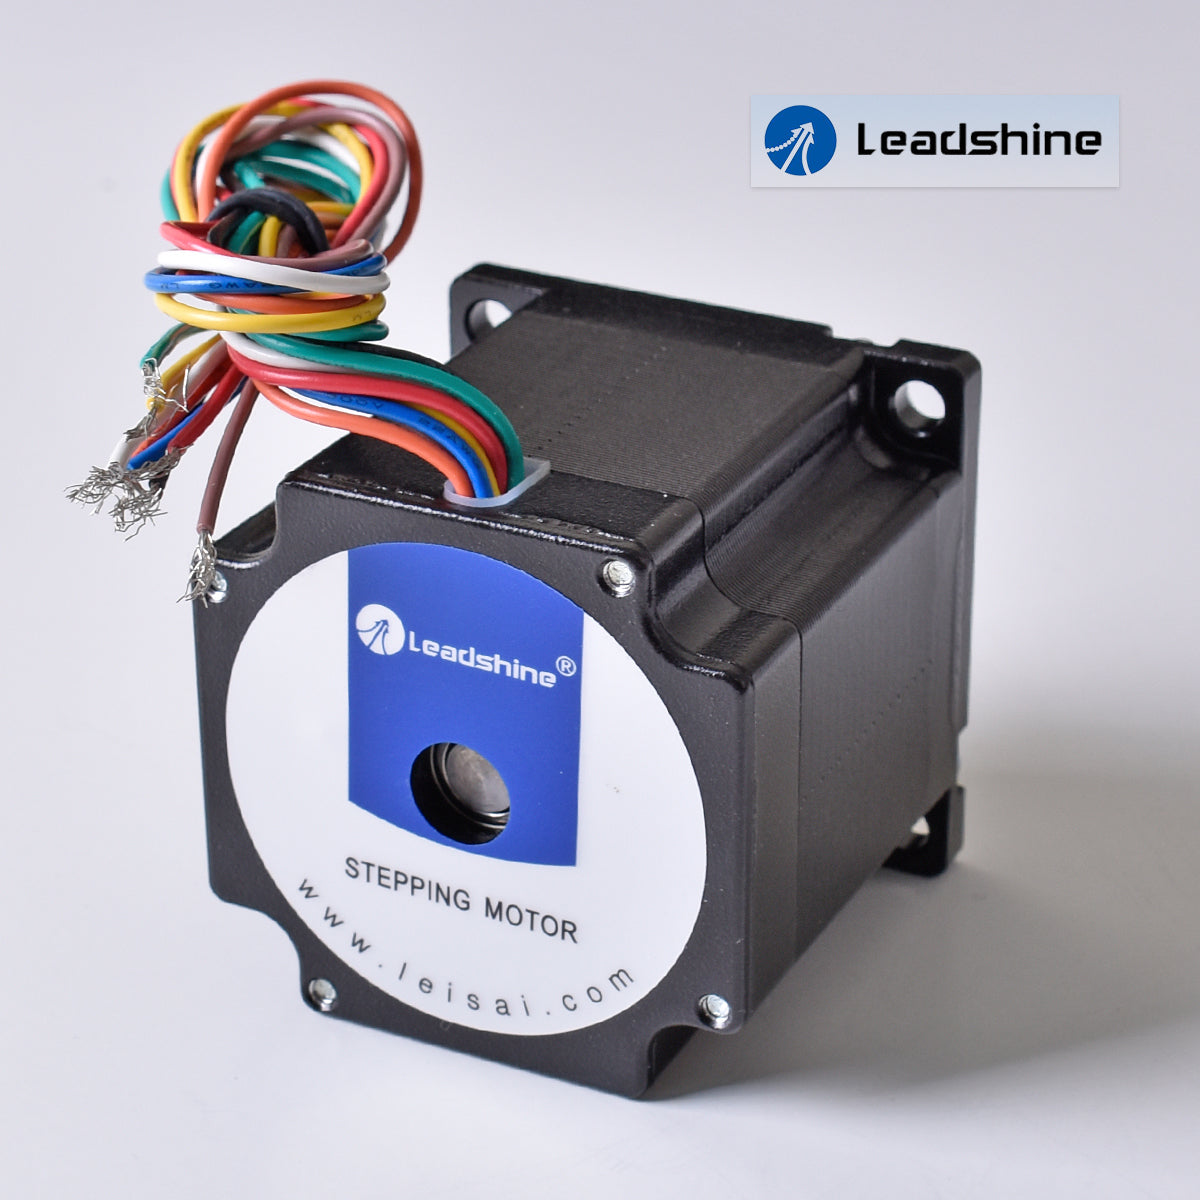 Leadshine 2 Phase Stepper Motor 57HS09 8 Wires Axis Diameter 6.35mm Axis Length 21mm NEMA23 Stepping Motor